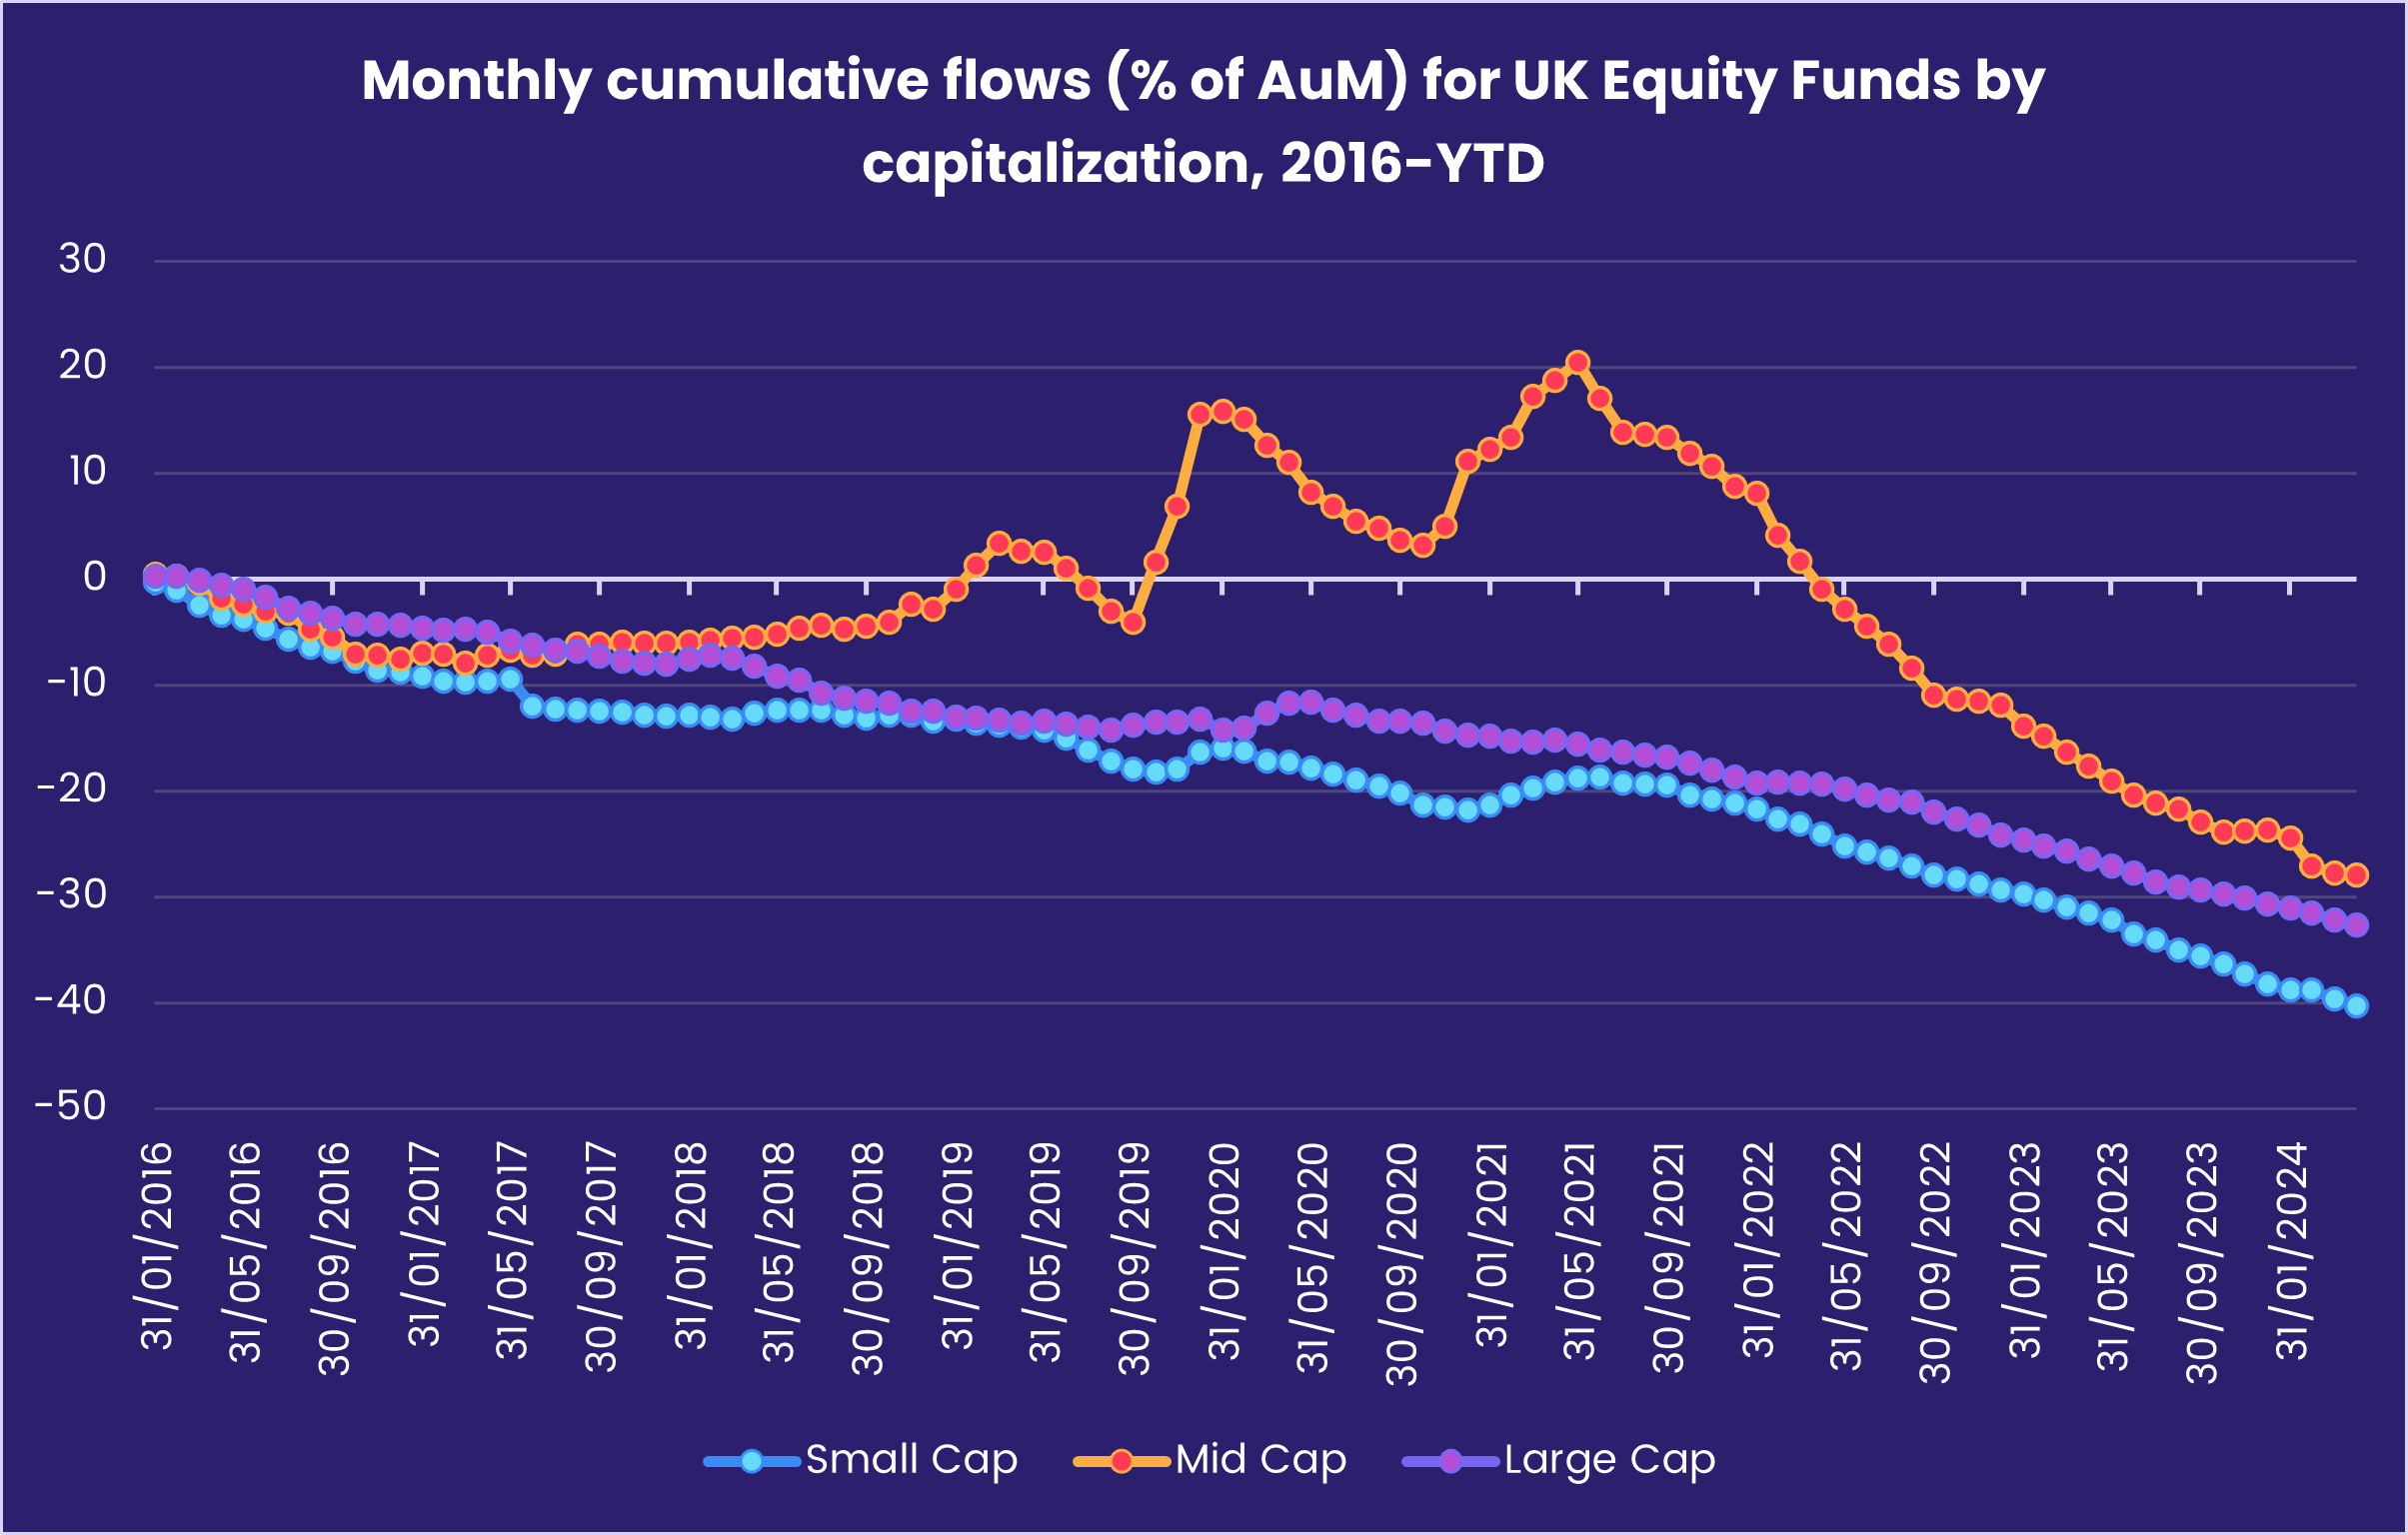 Chart representing 'Monthly Cumulative flows (% of AuM) for UK Equity Funds by capitalization, 2016-YTD'